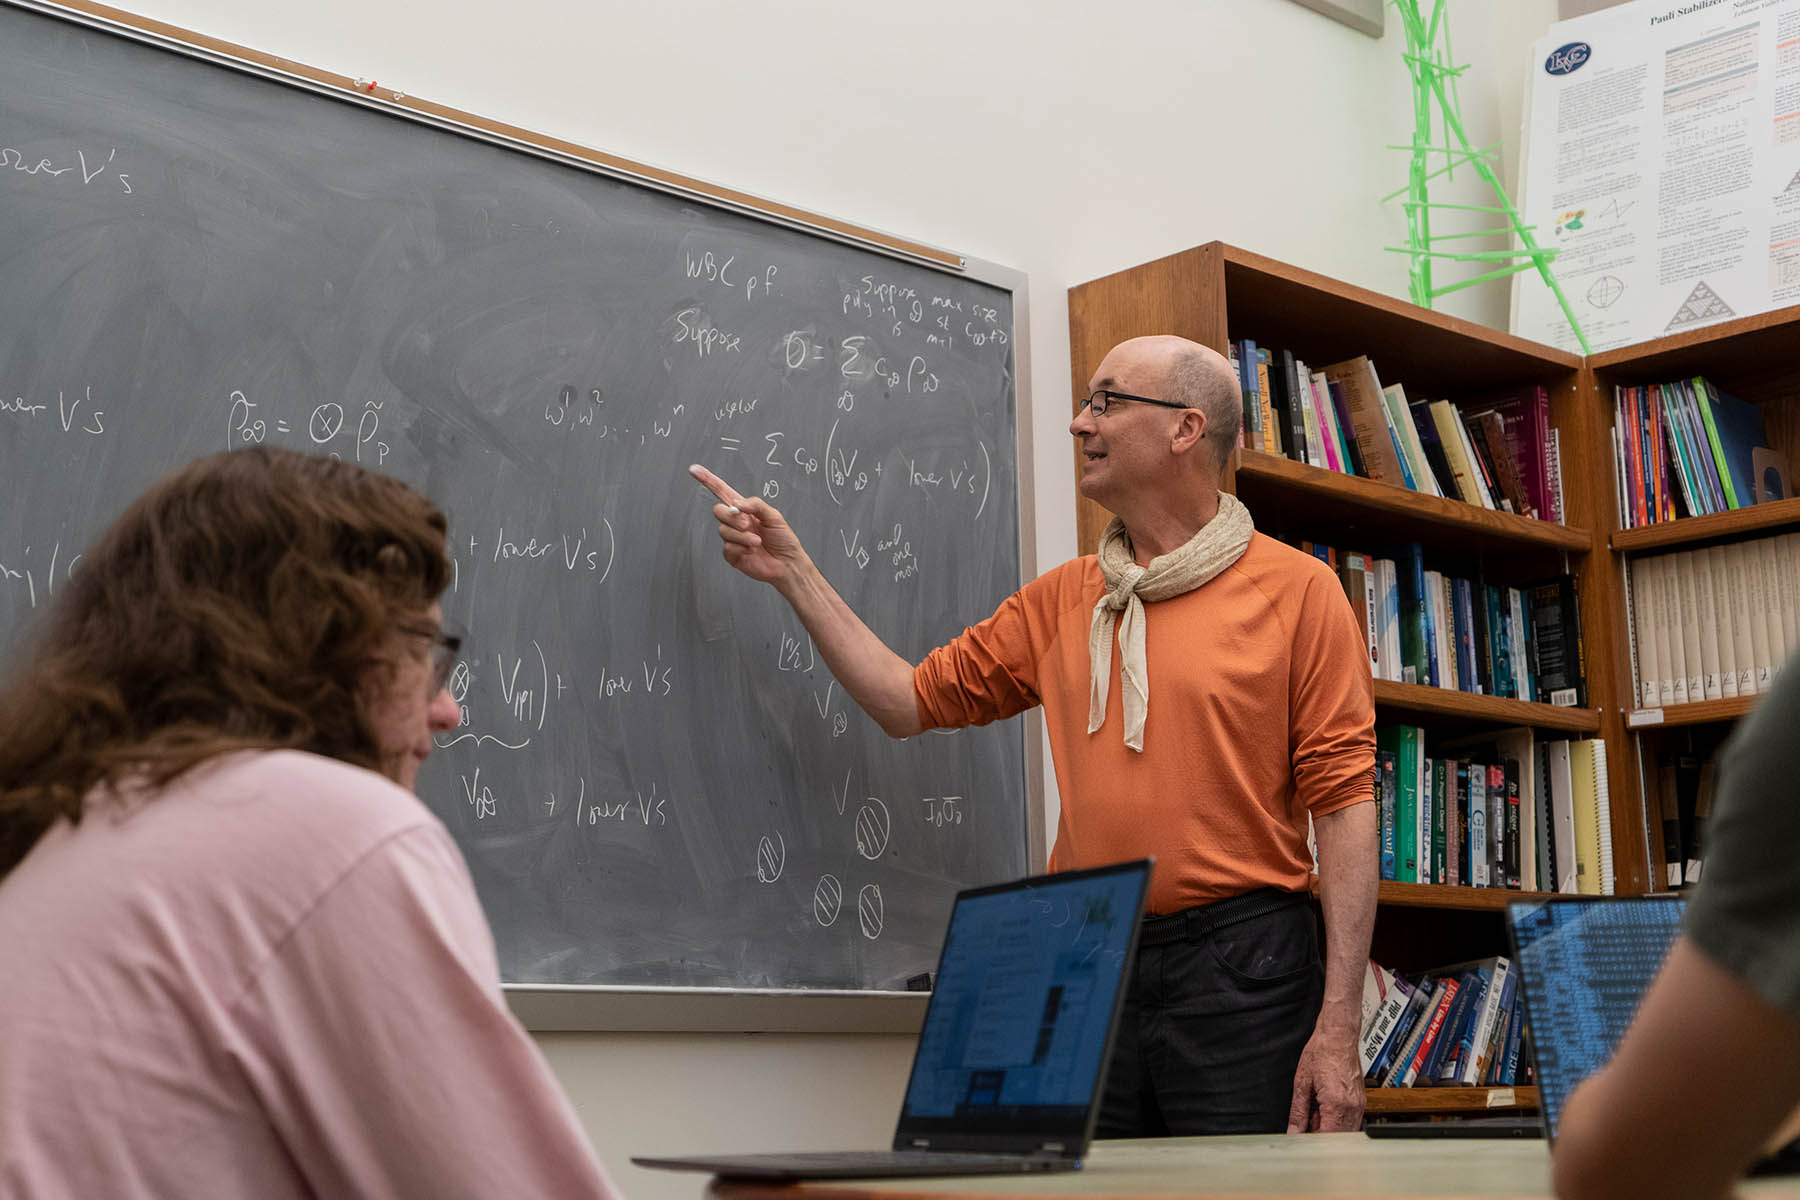 Professor pointing to an equation on a chalkboard.